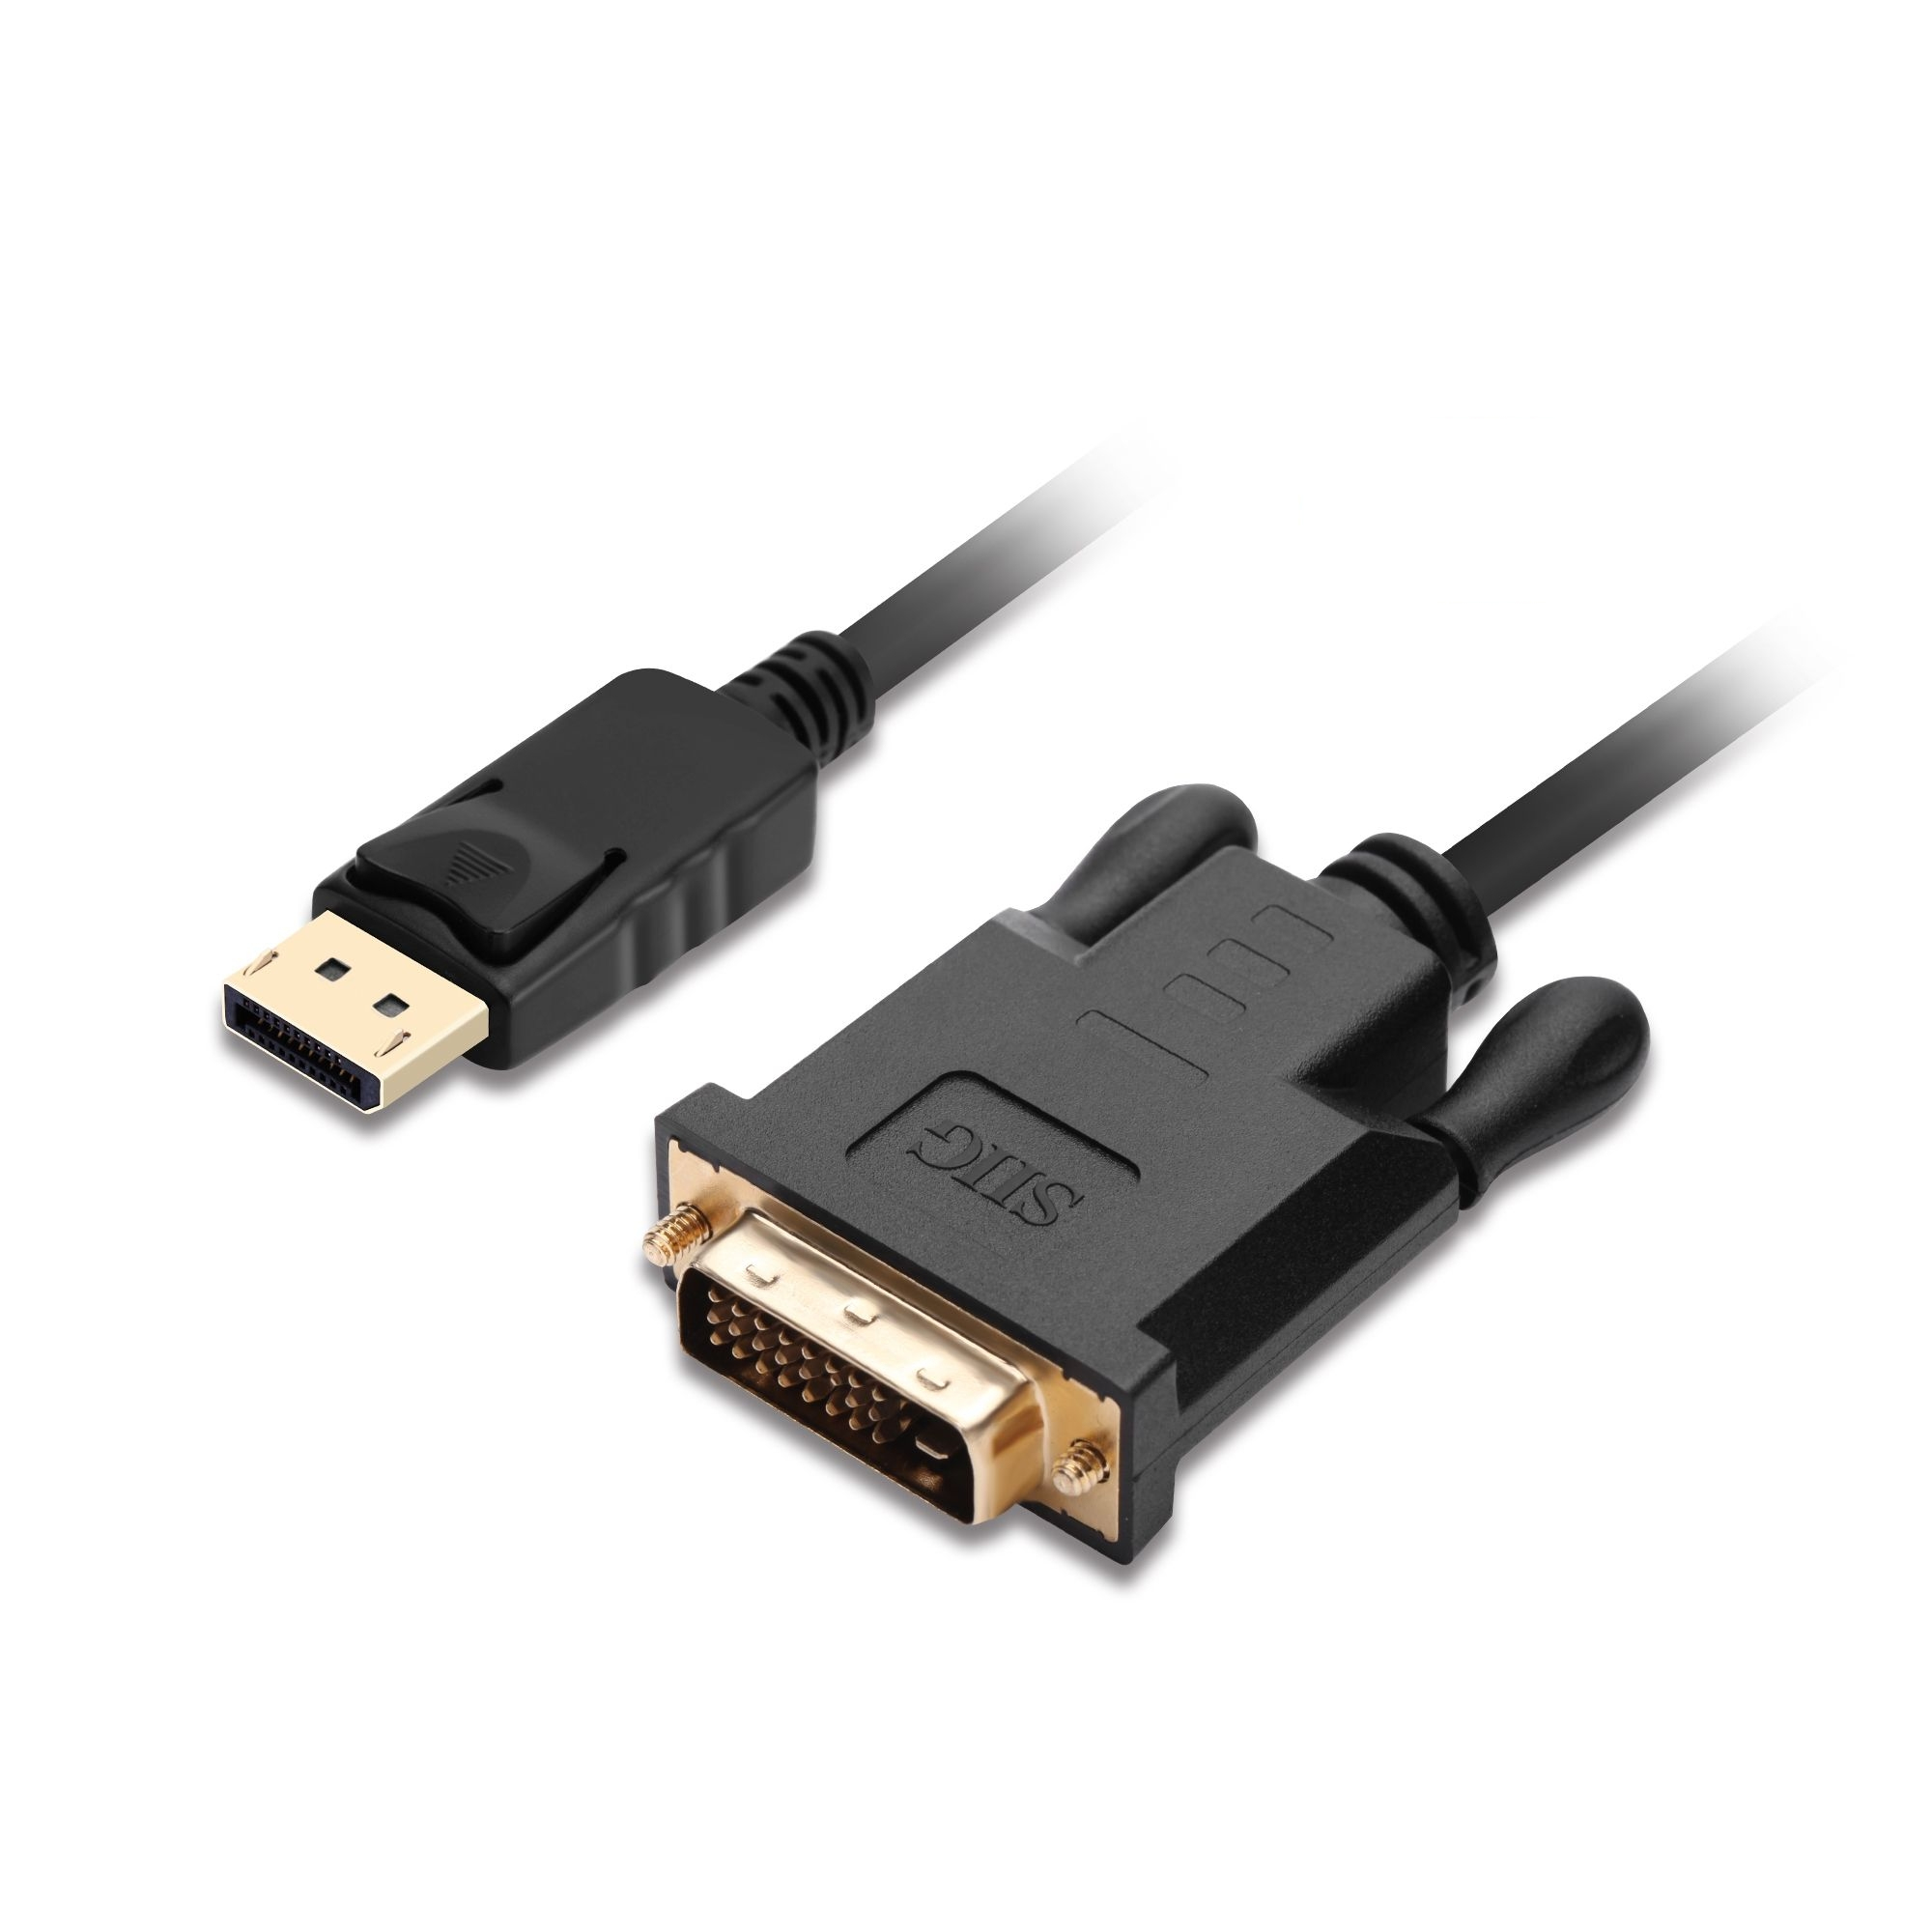 CB-DP1V12-S1 SIIG DisplayPort to DVI 6ft Cable